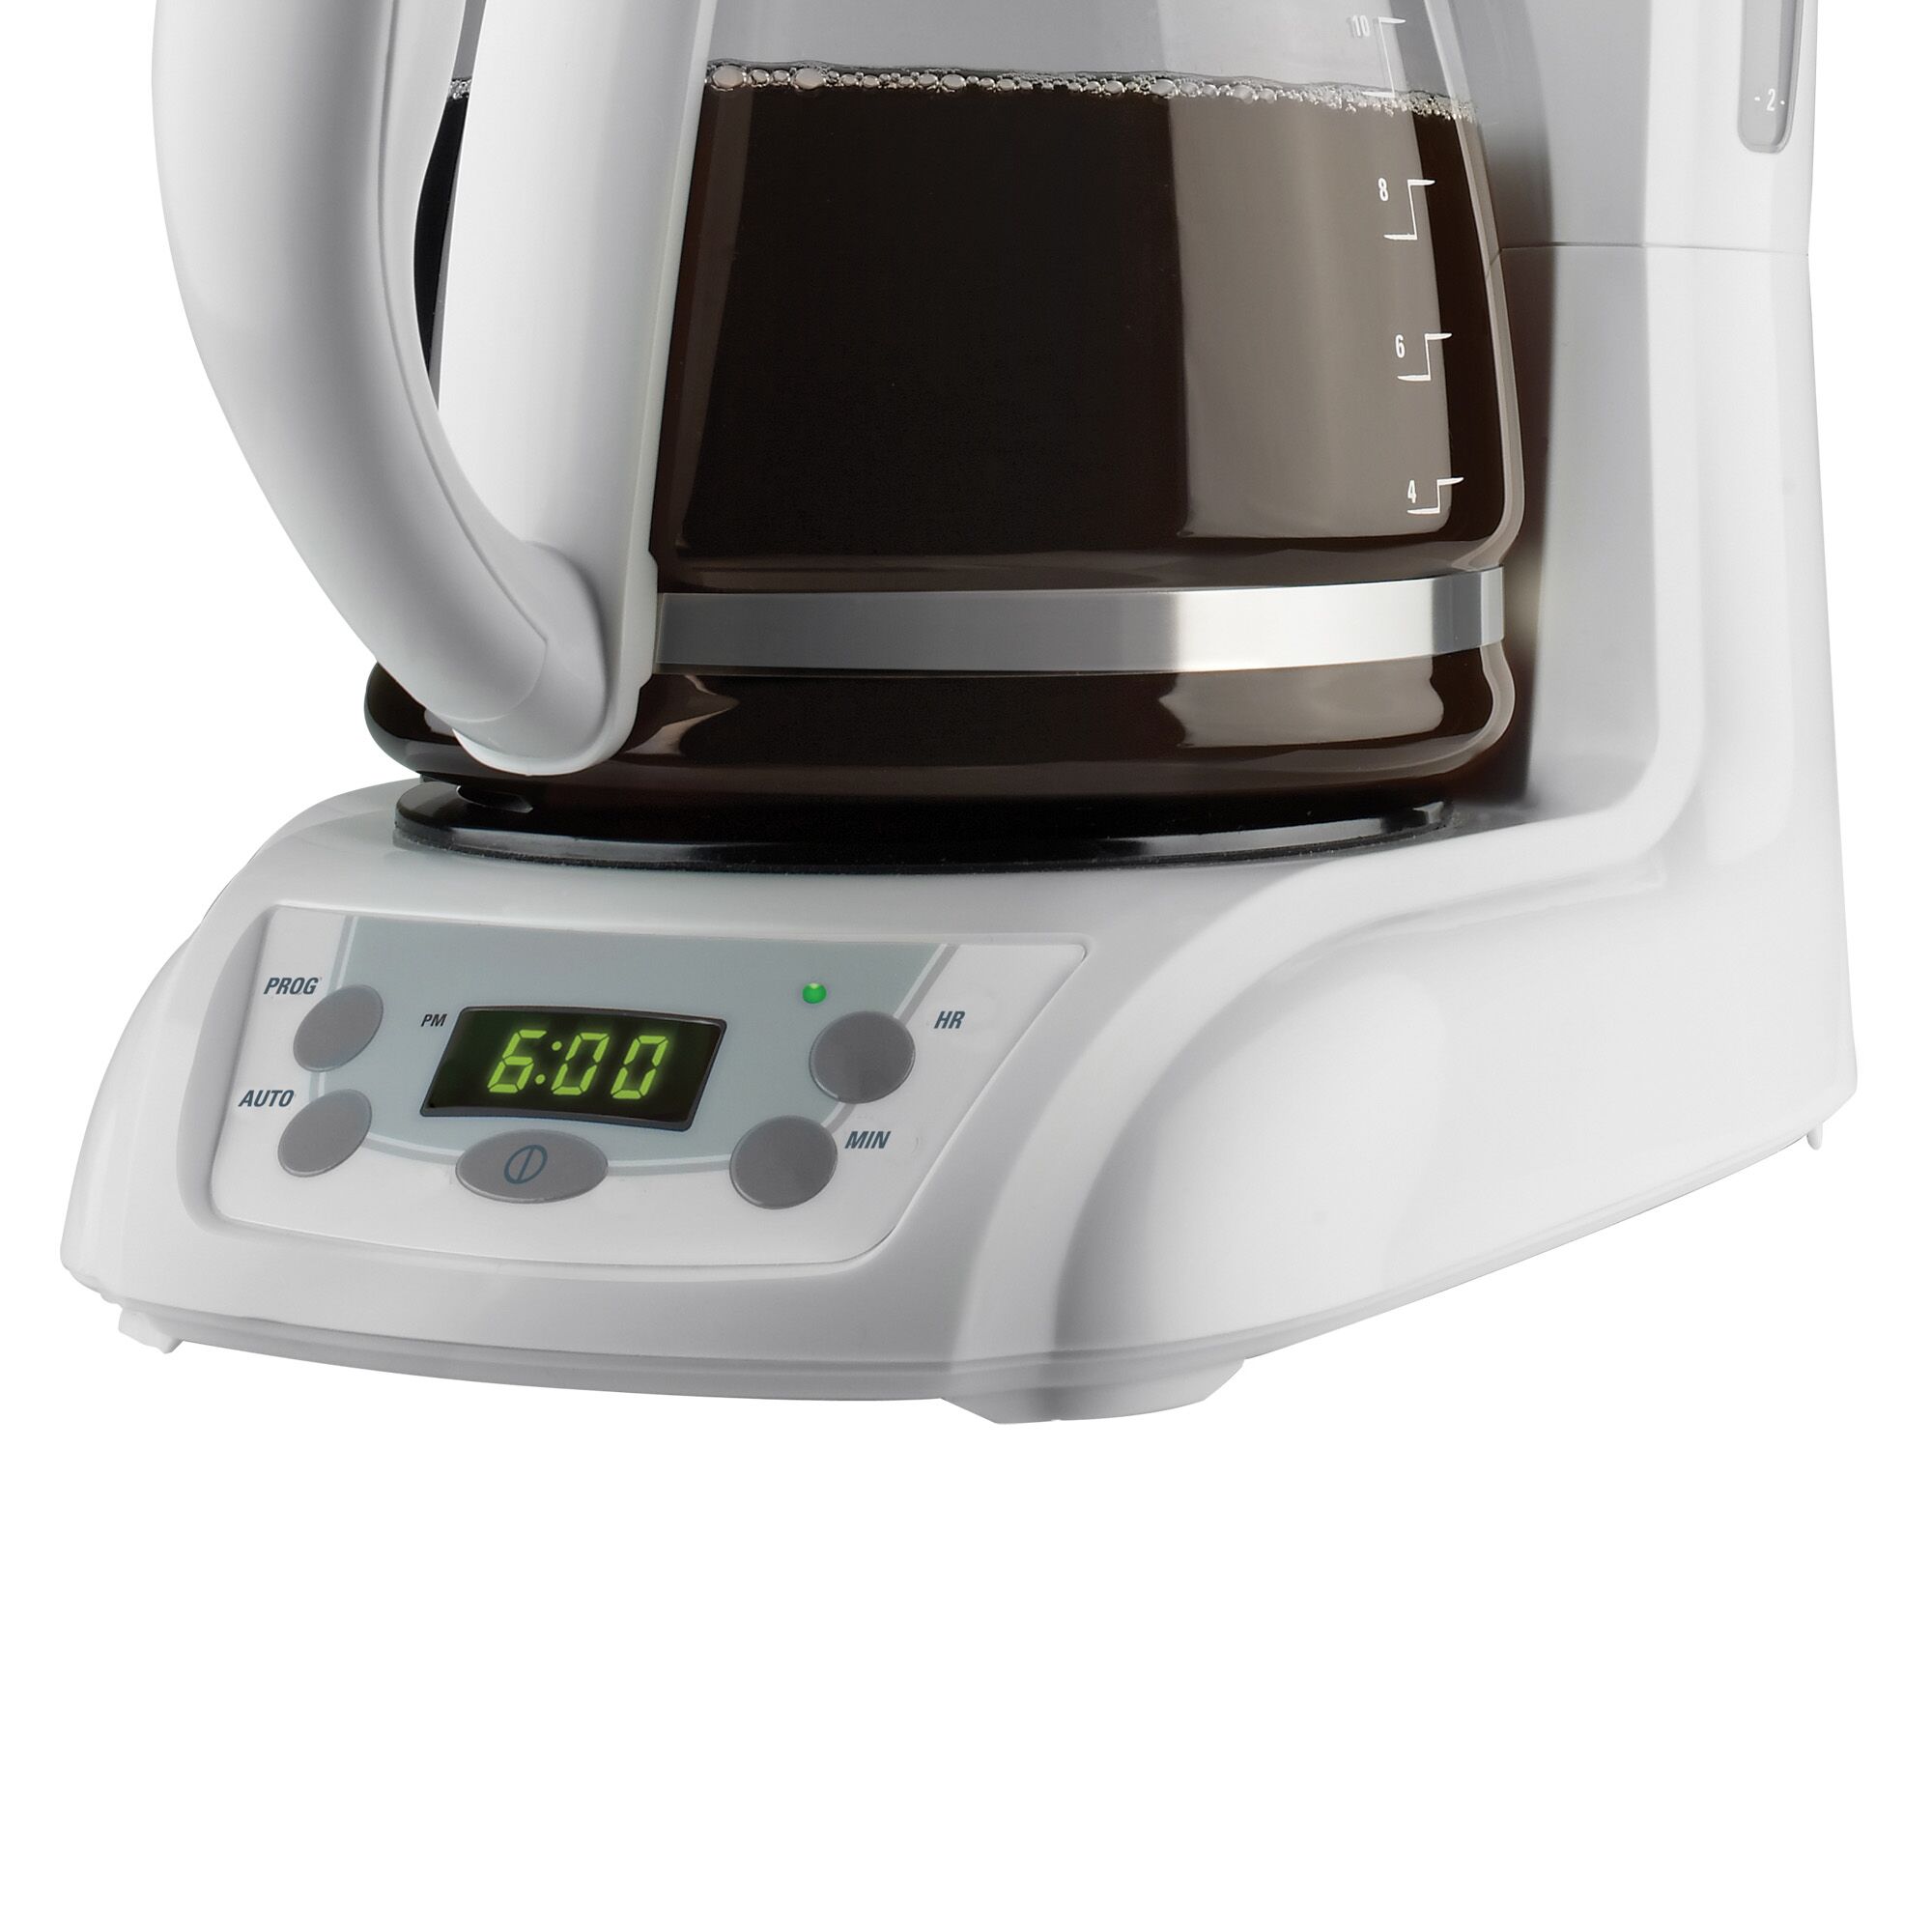 12 Cup Programmable Coffee Maker.